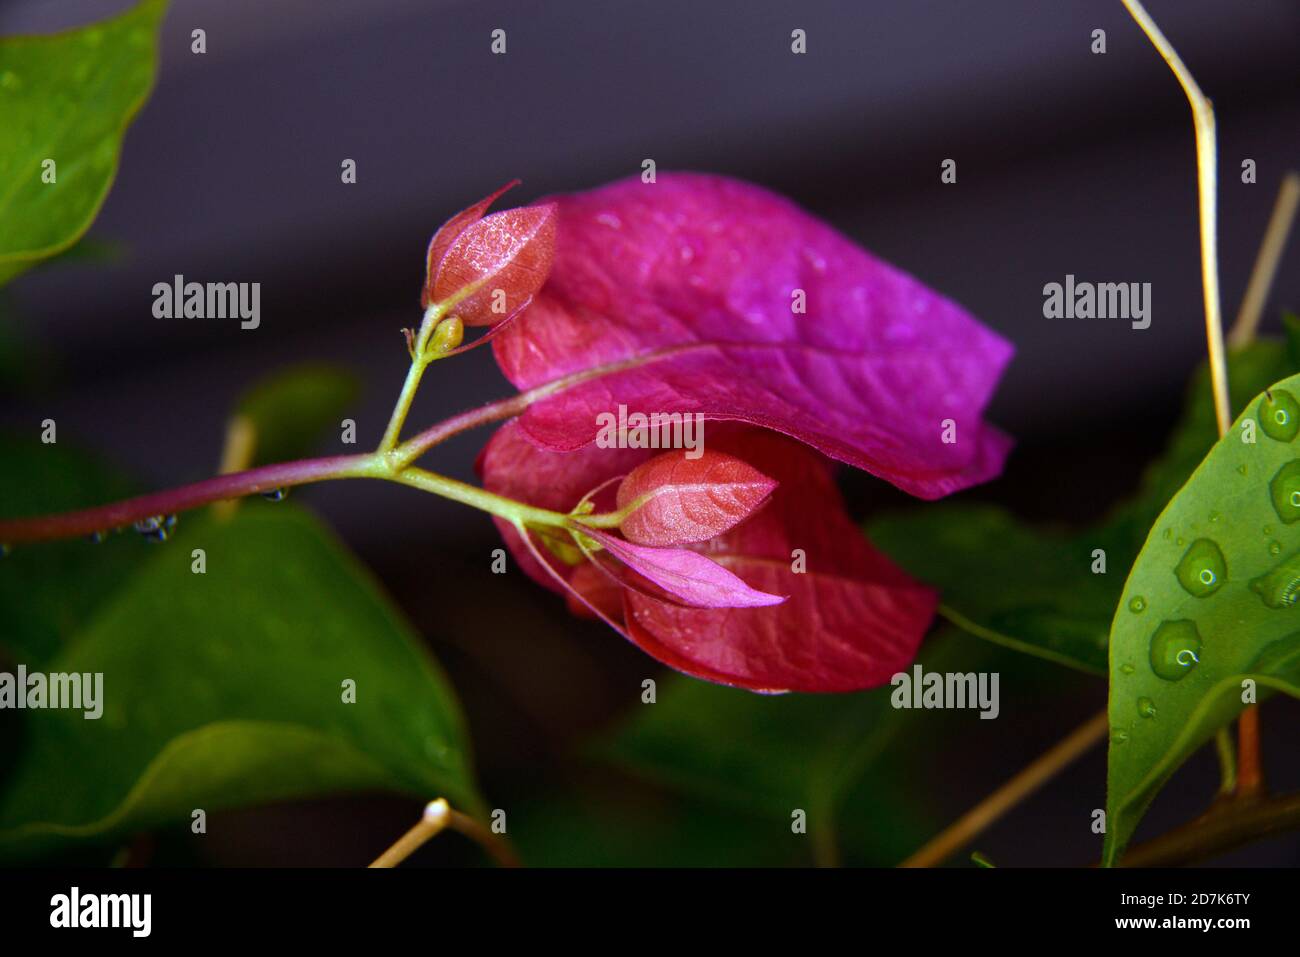 Bougainvillea plant and blooms Stock Photo